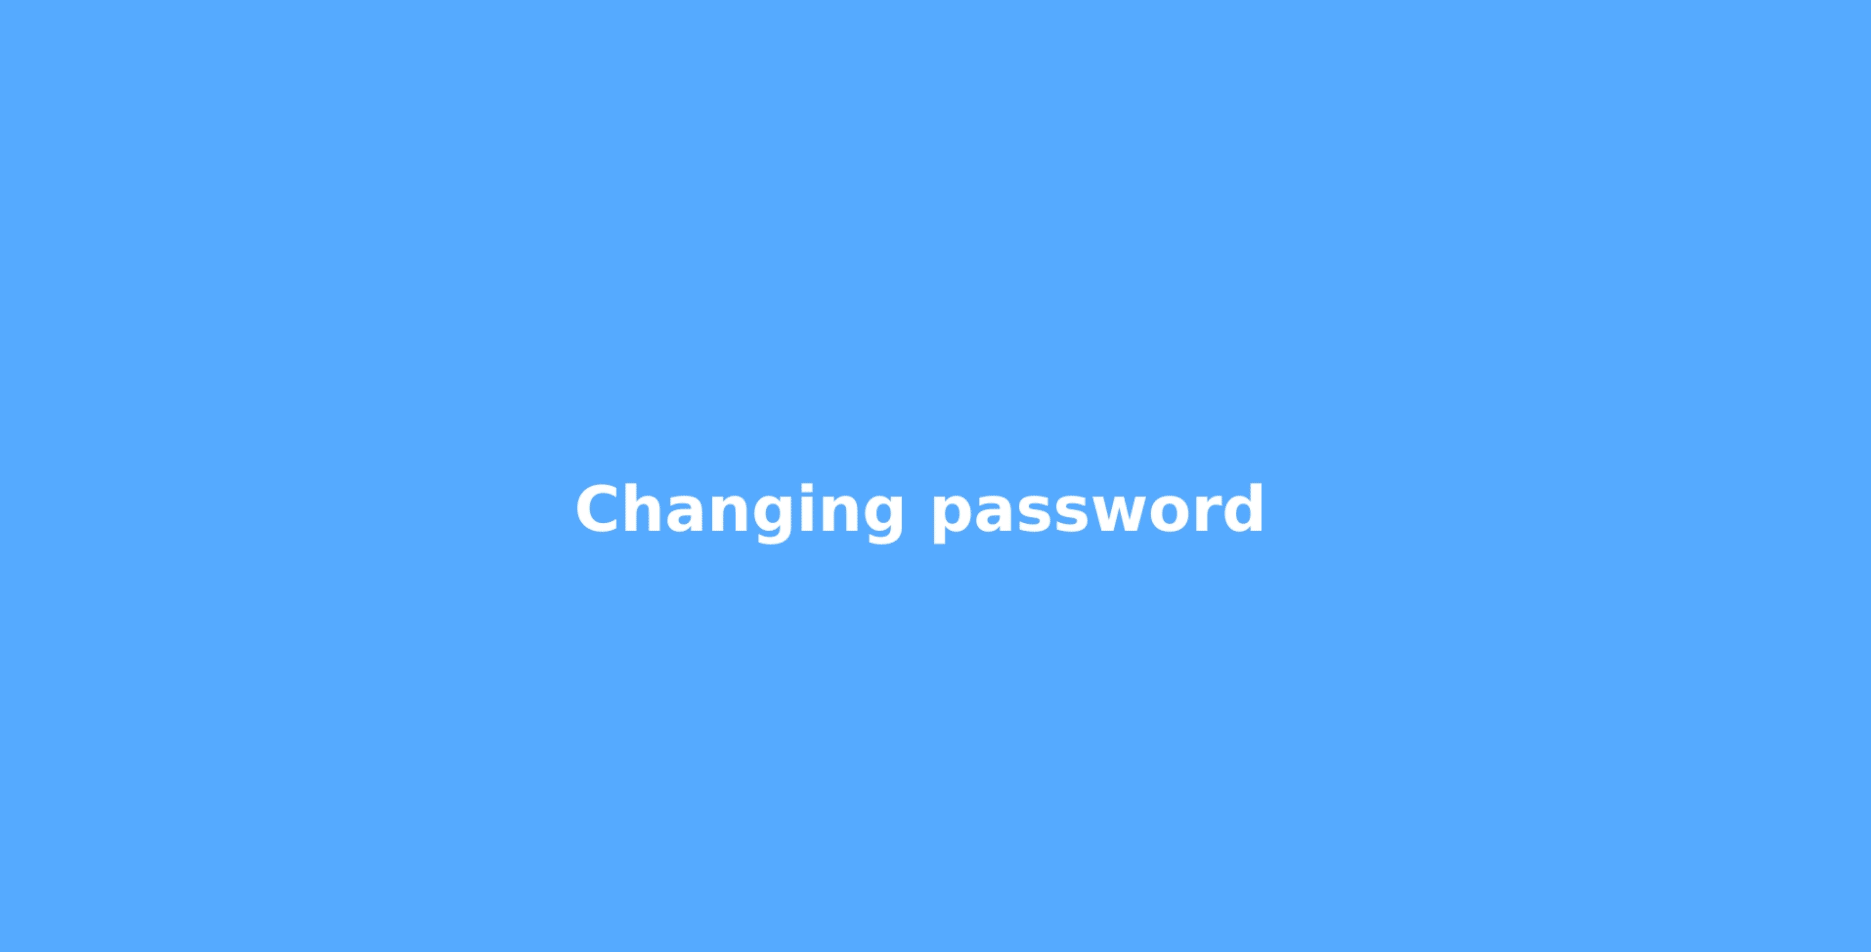 animation with steps to change password